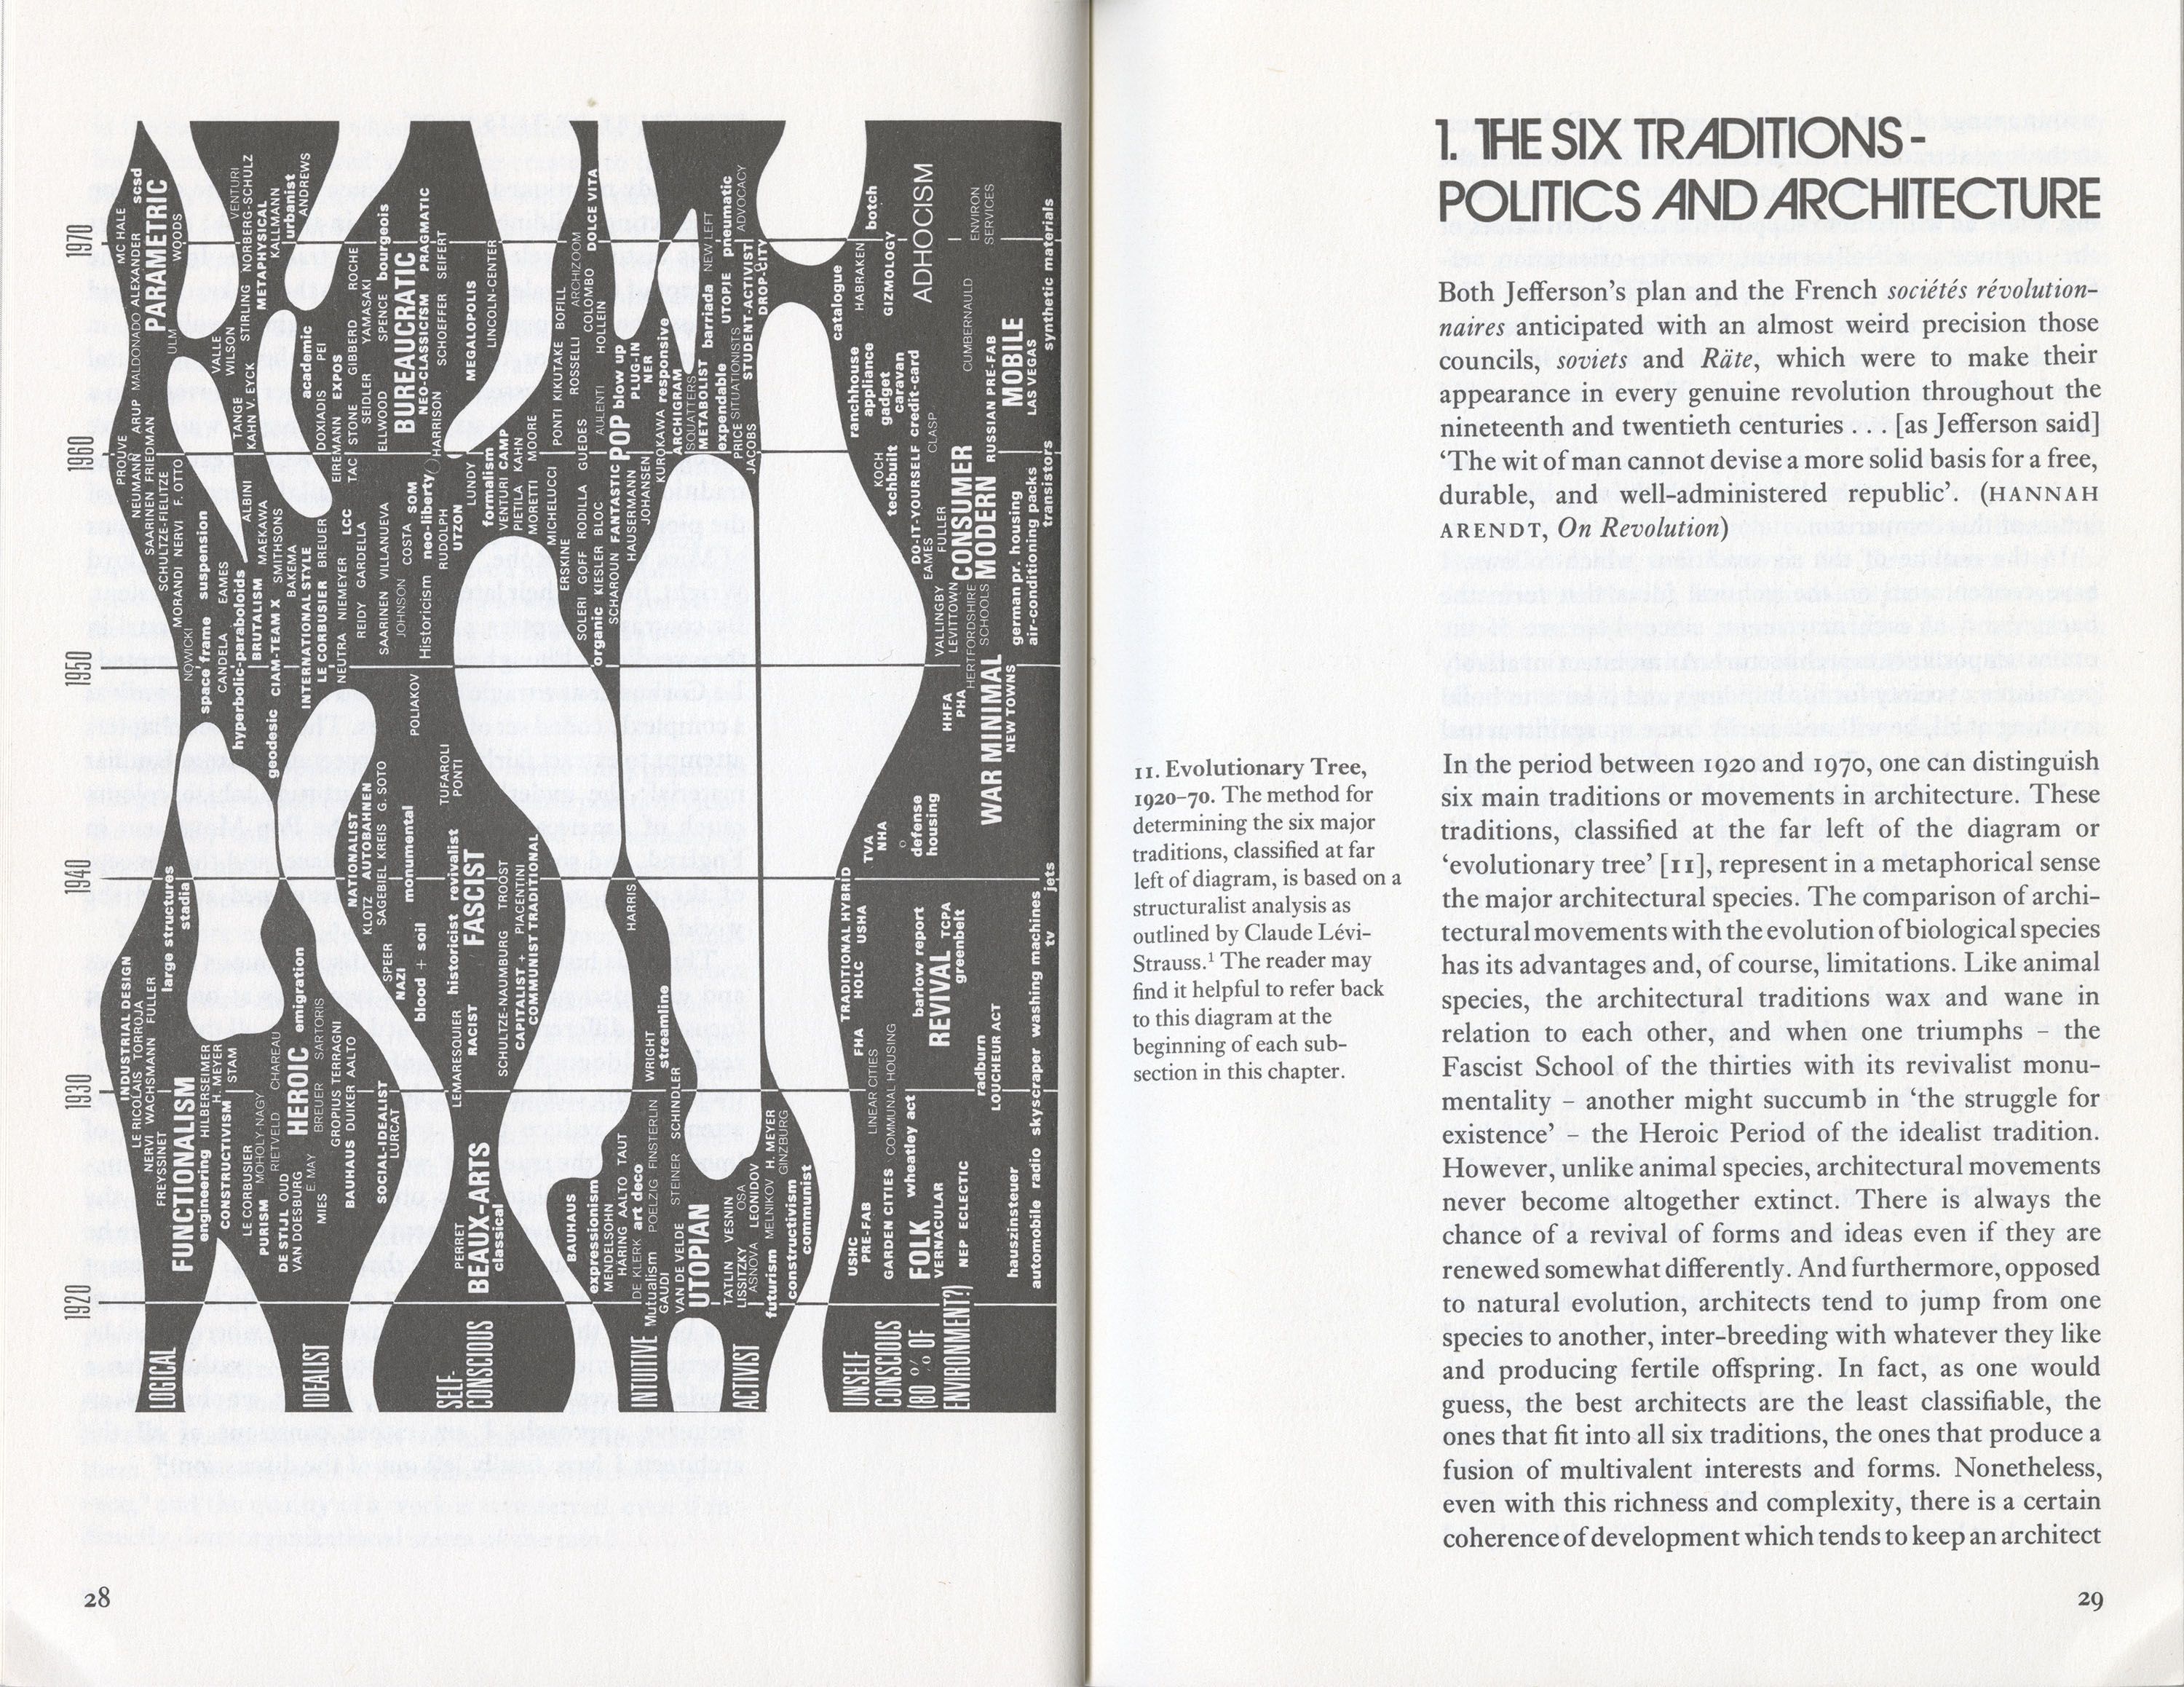 A beautiful book embodying Frank Gehry's radical design for the